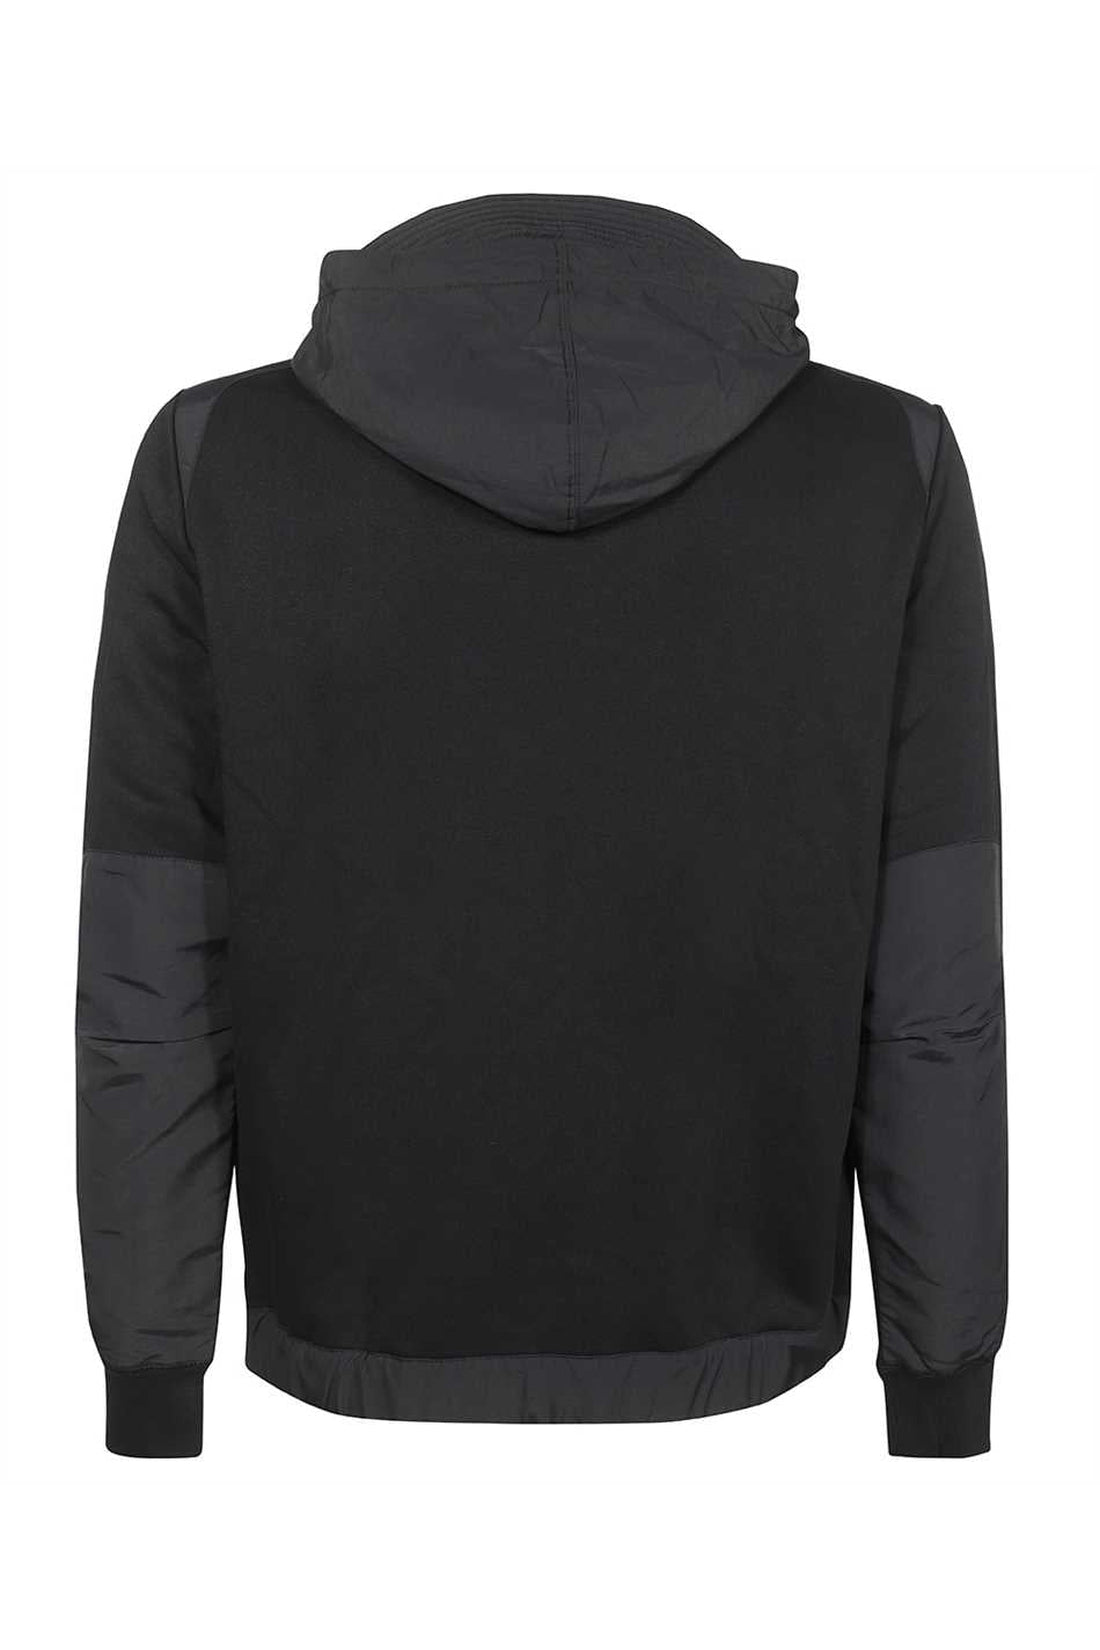 Parajumpers-OUTLET-SALE-Full zip hoodie-ARCHIVIST